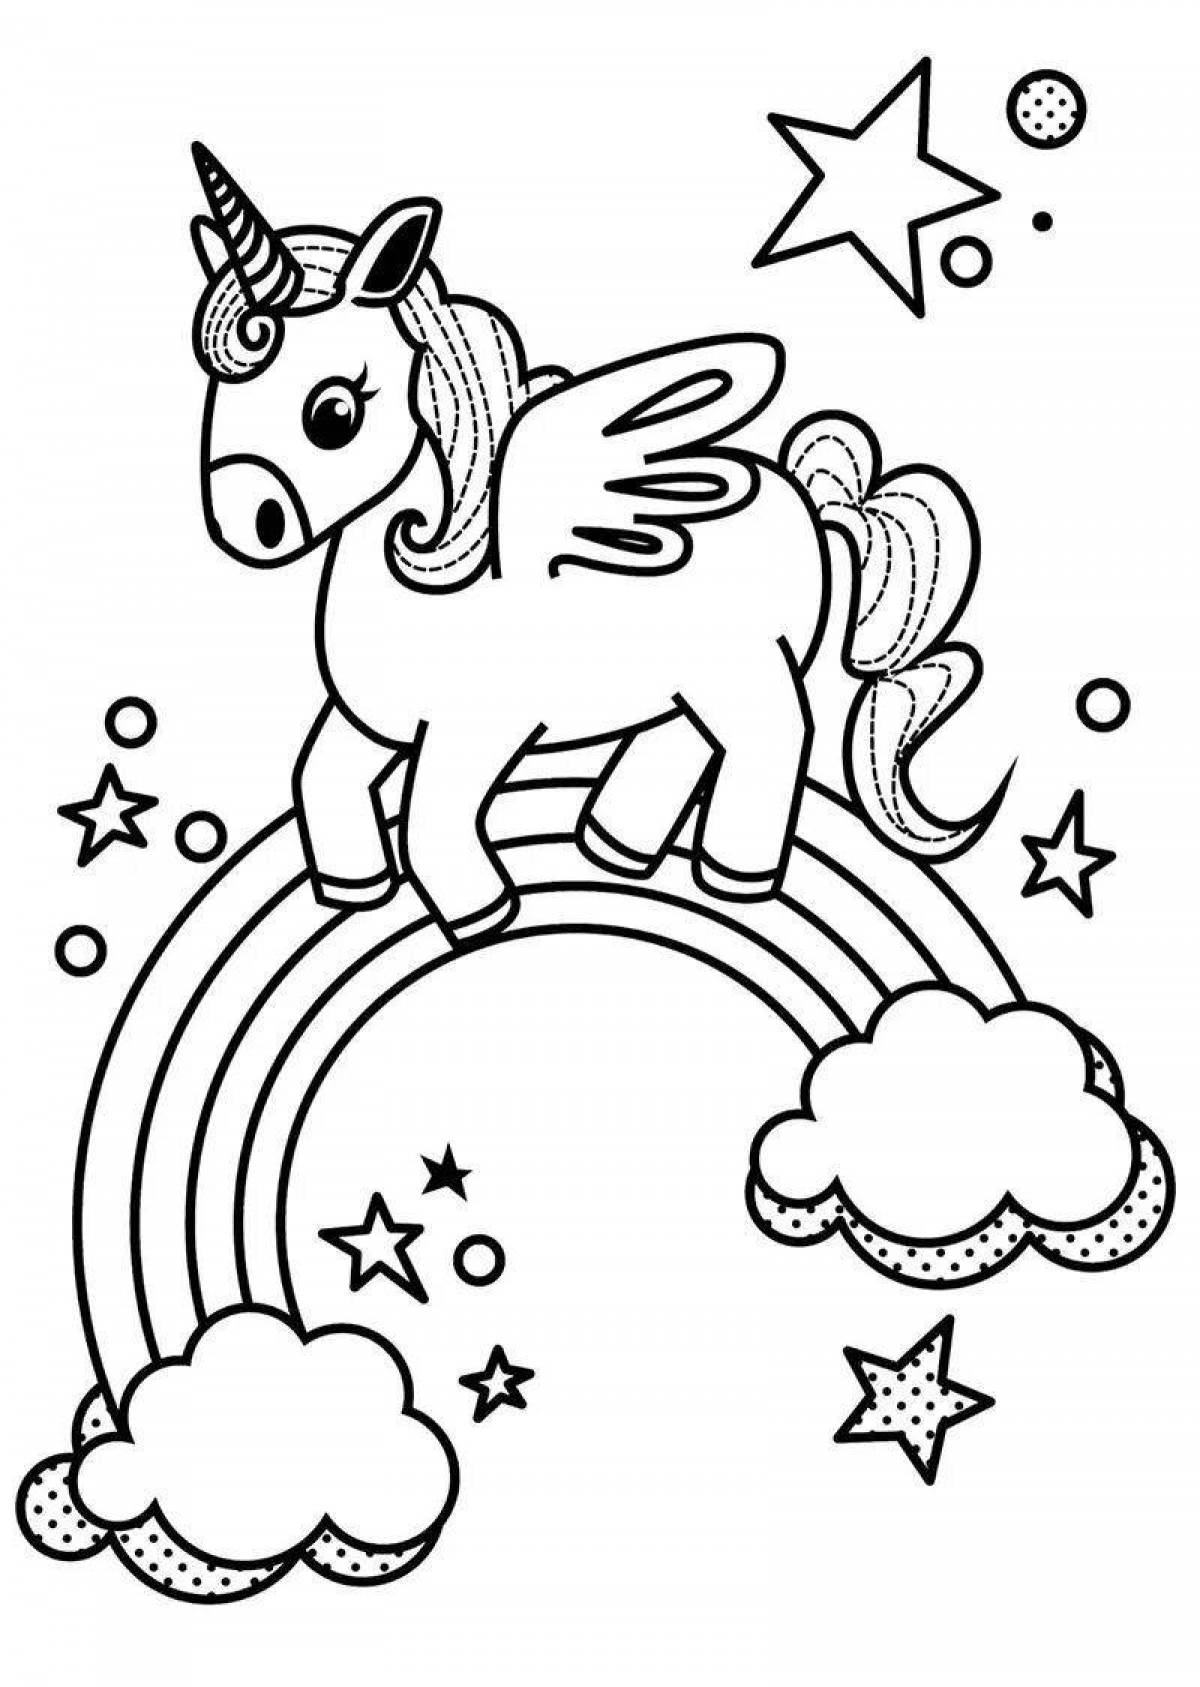 Noble coloring drawing of a unicorn